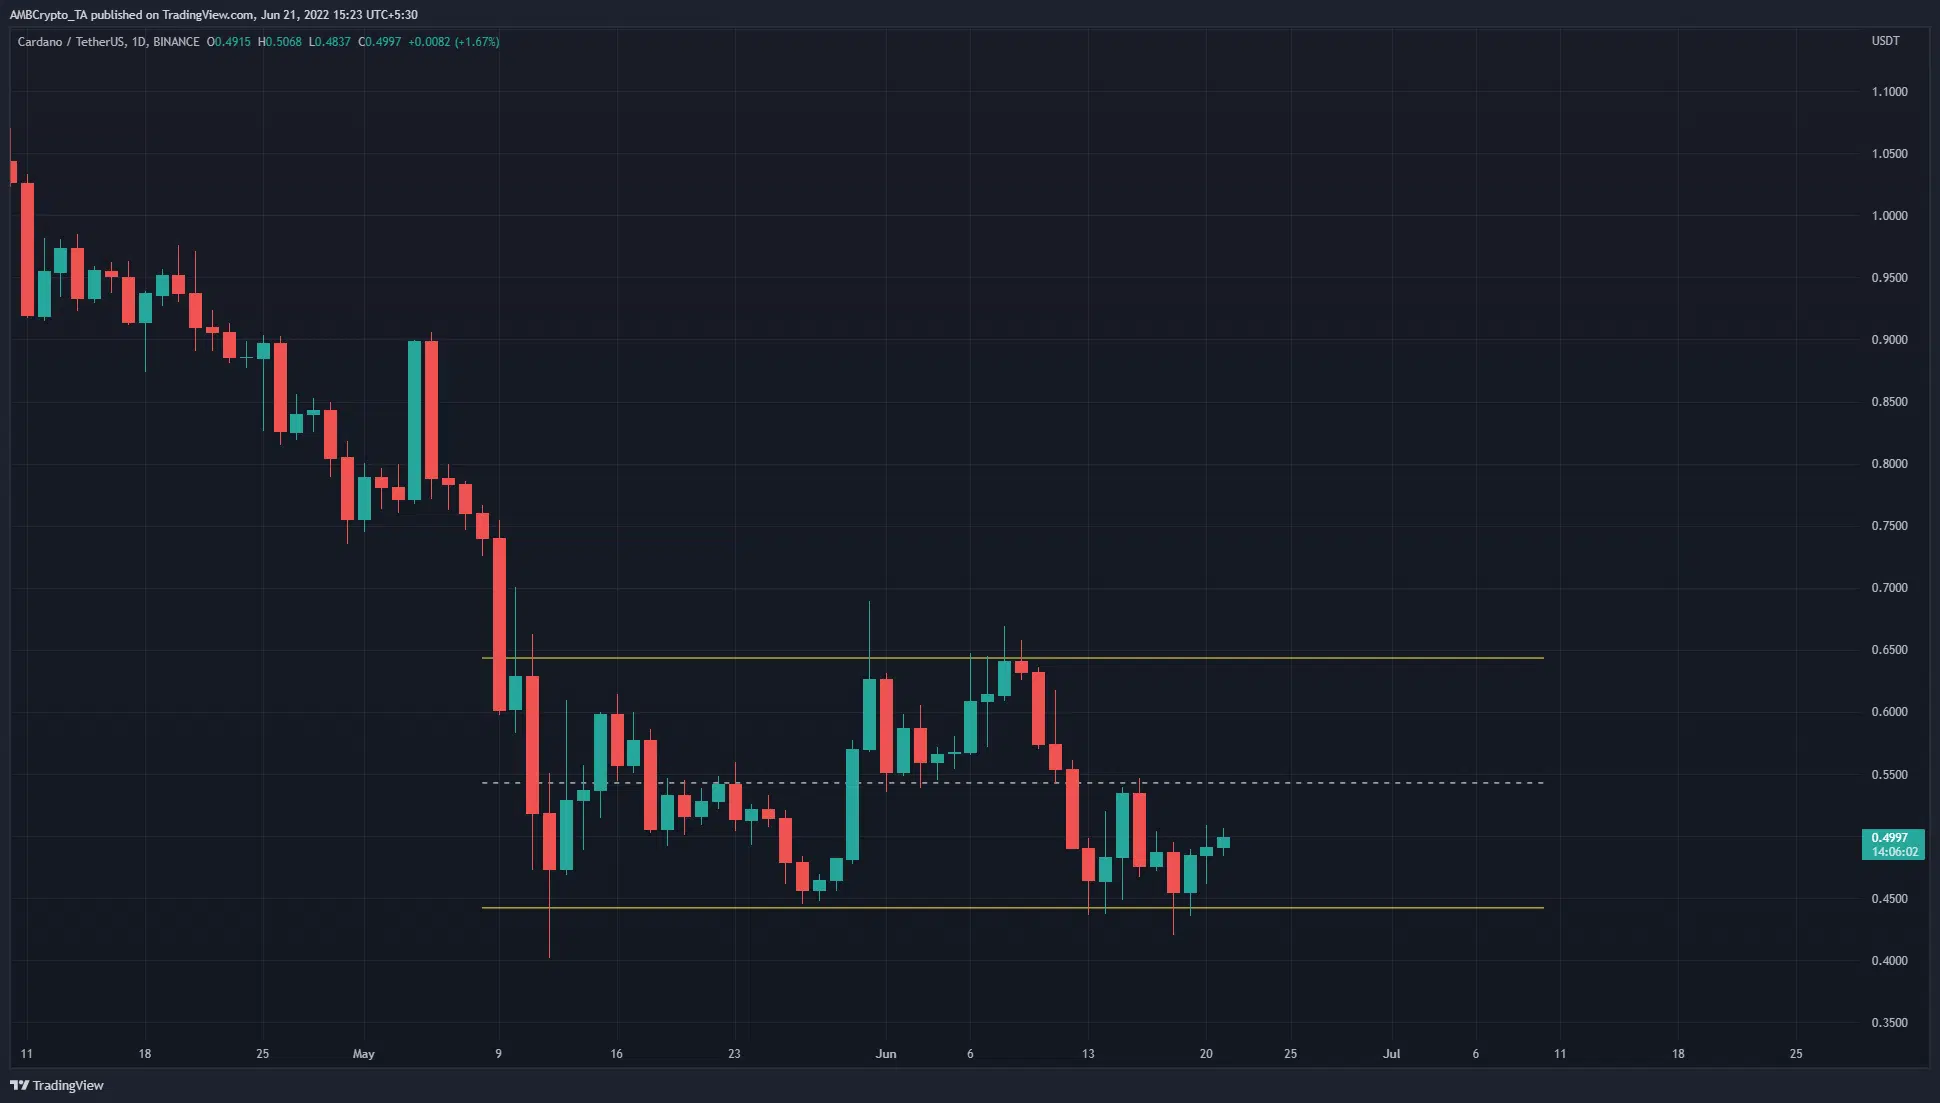 Cardano trades within a range but a move upward could be around the corner